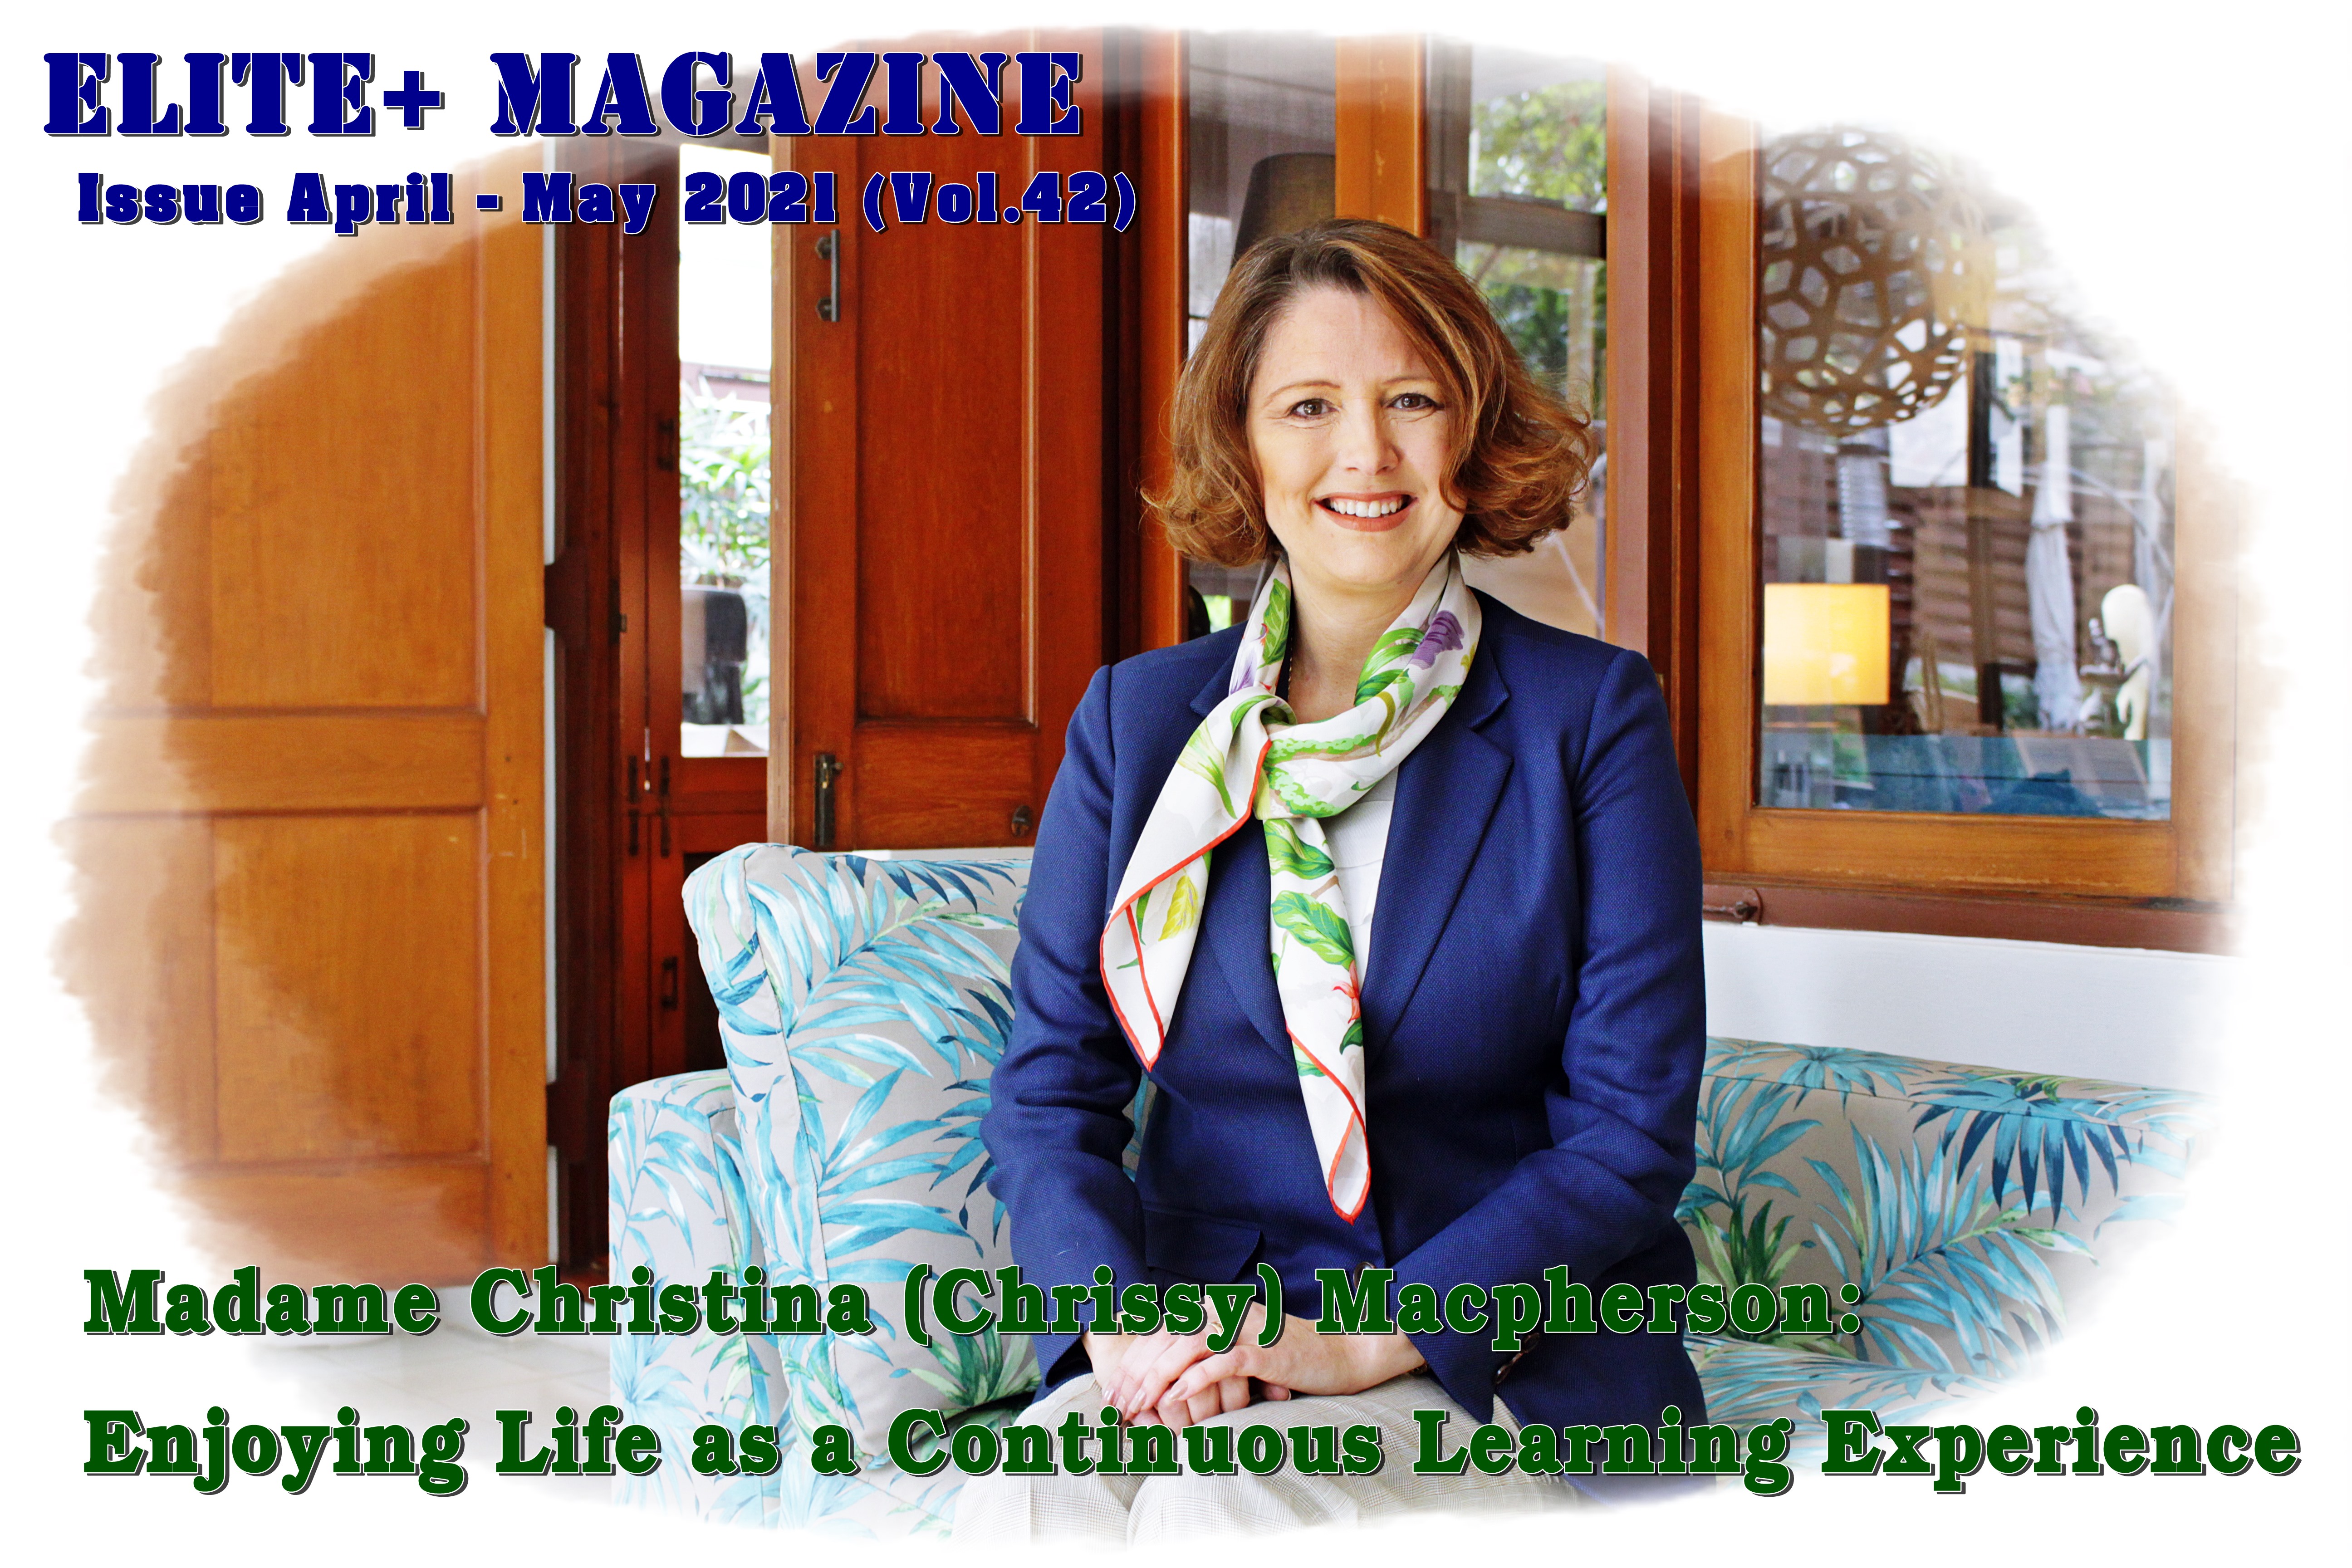 Madame Christina (chrissy) Macpherson: Enjoying Life As A Continuous Learning Experience